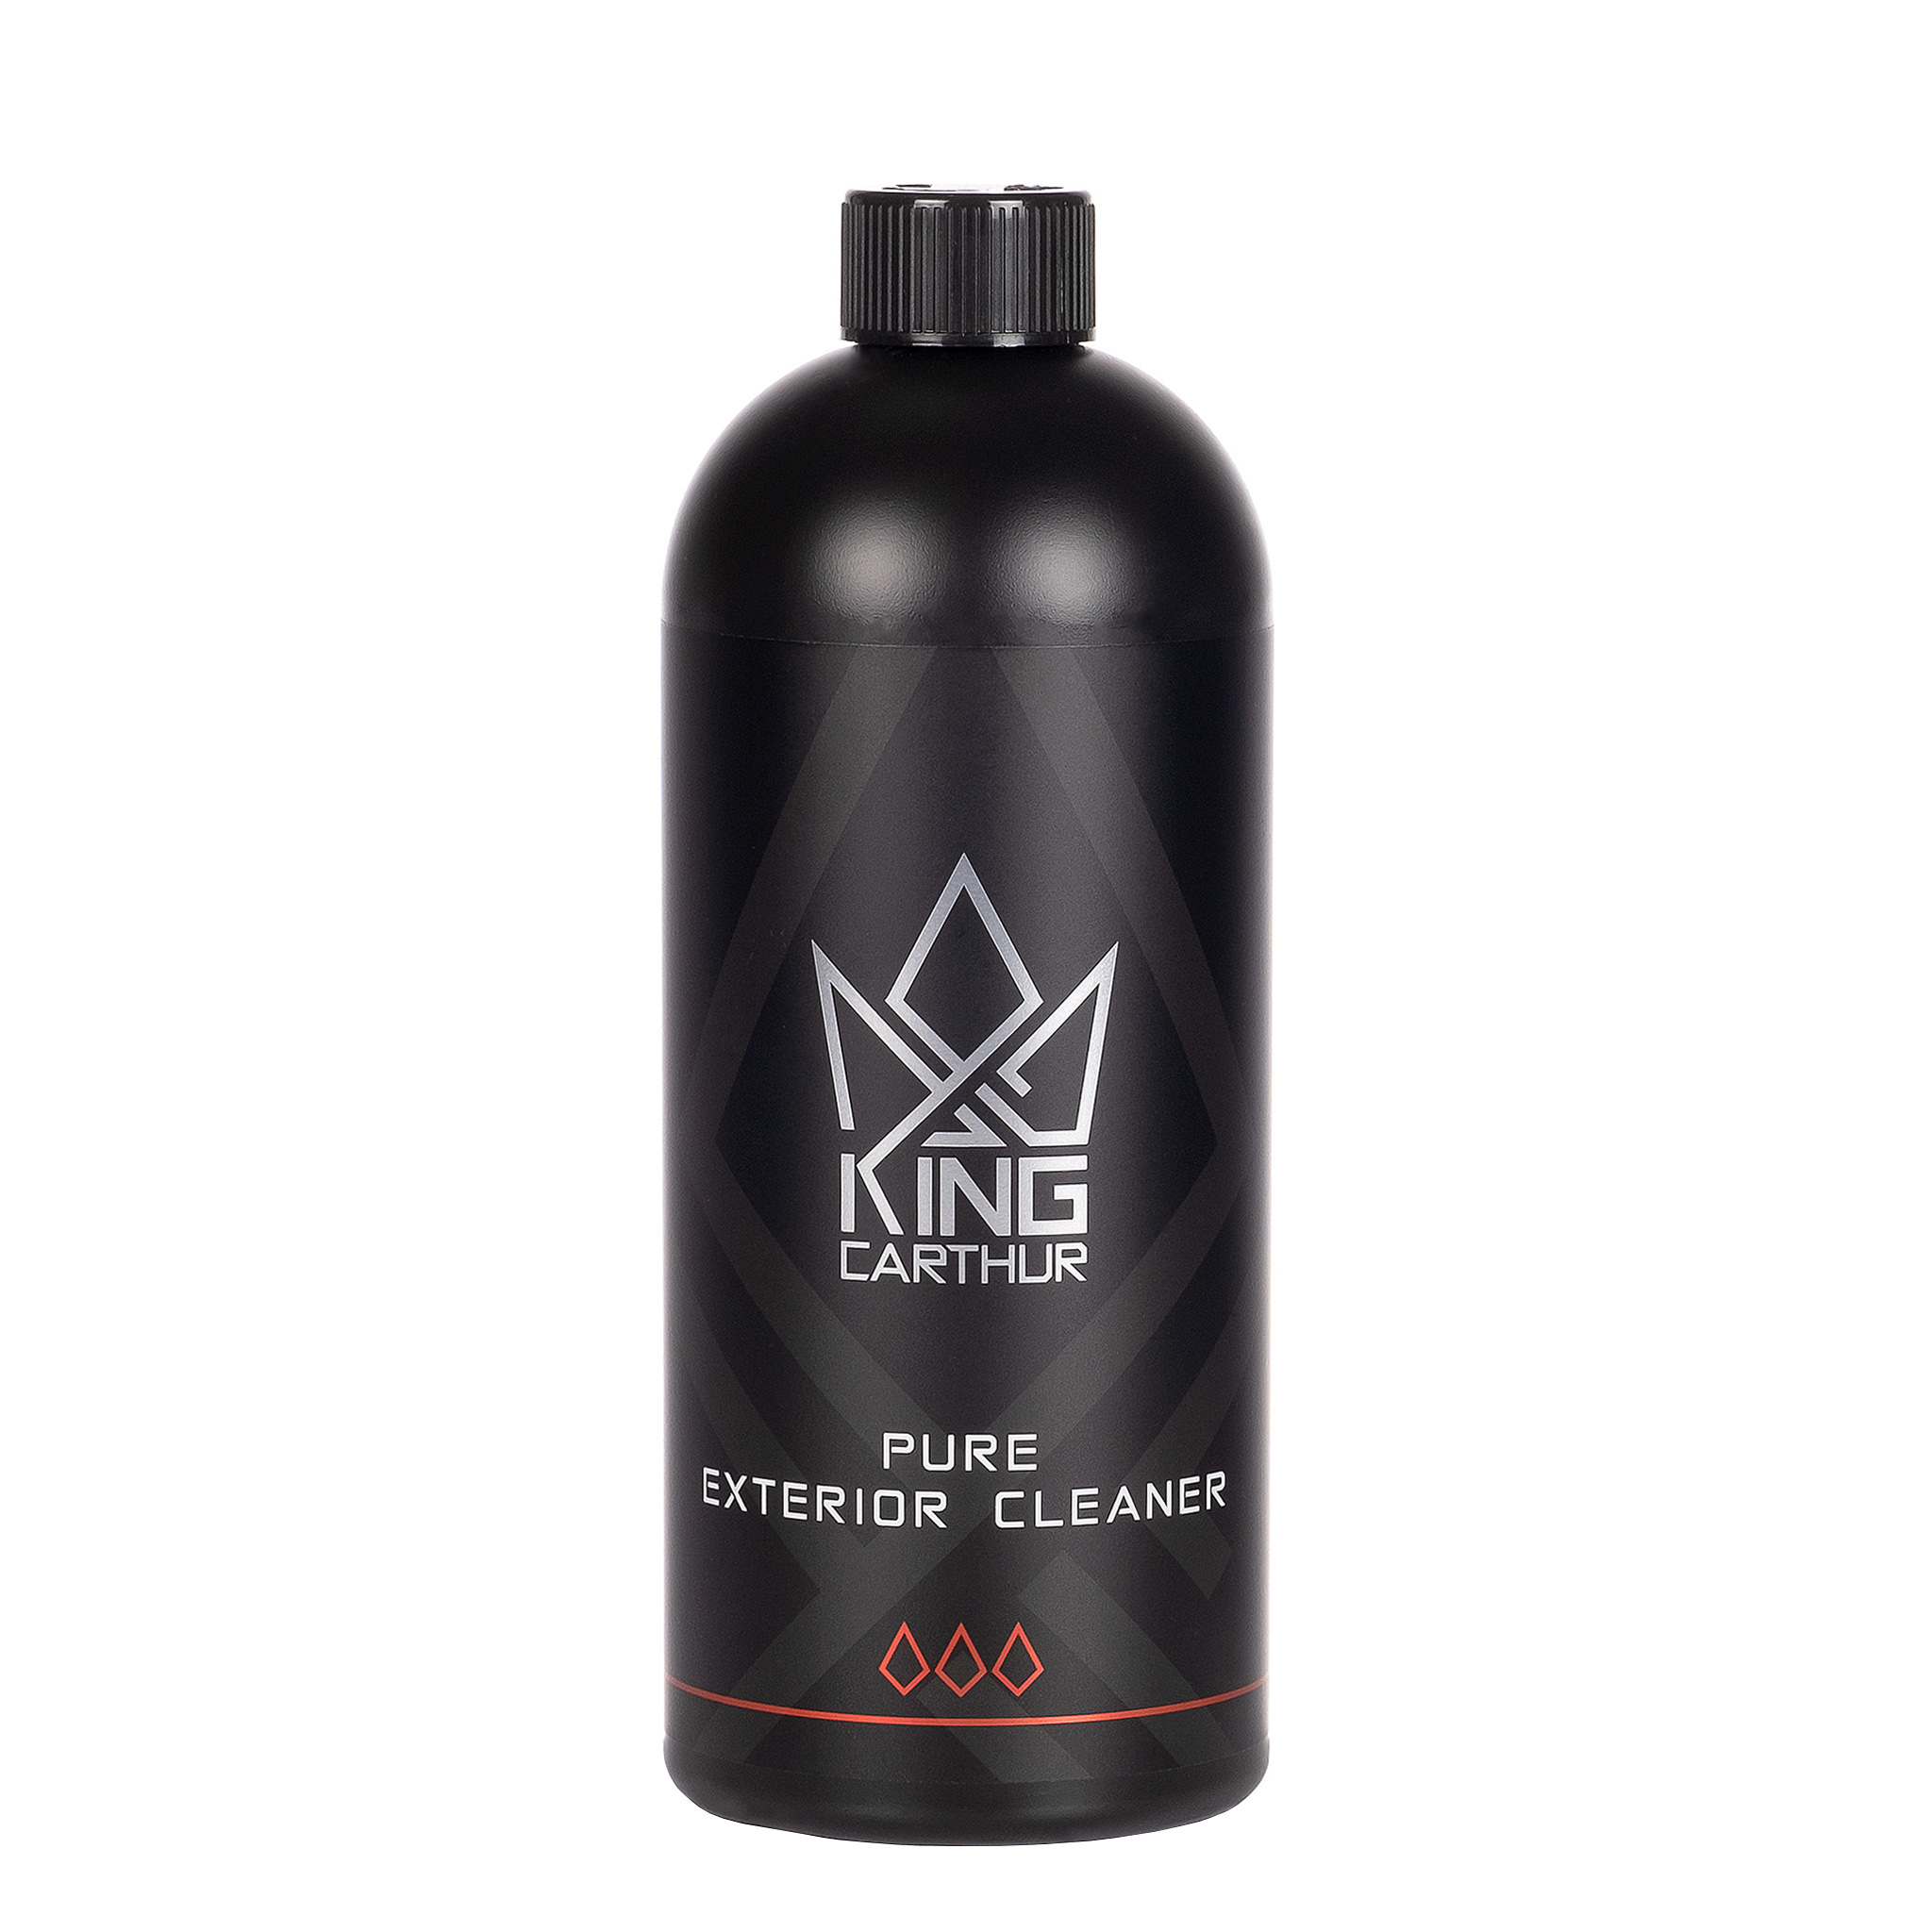 Cleaner King Carthur PURE Exterior Cleaner, 1000 ml, 1000 ml